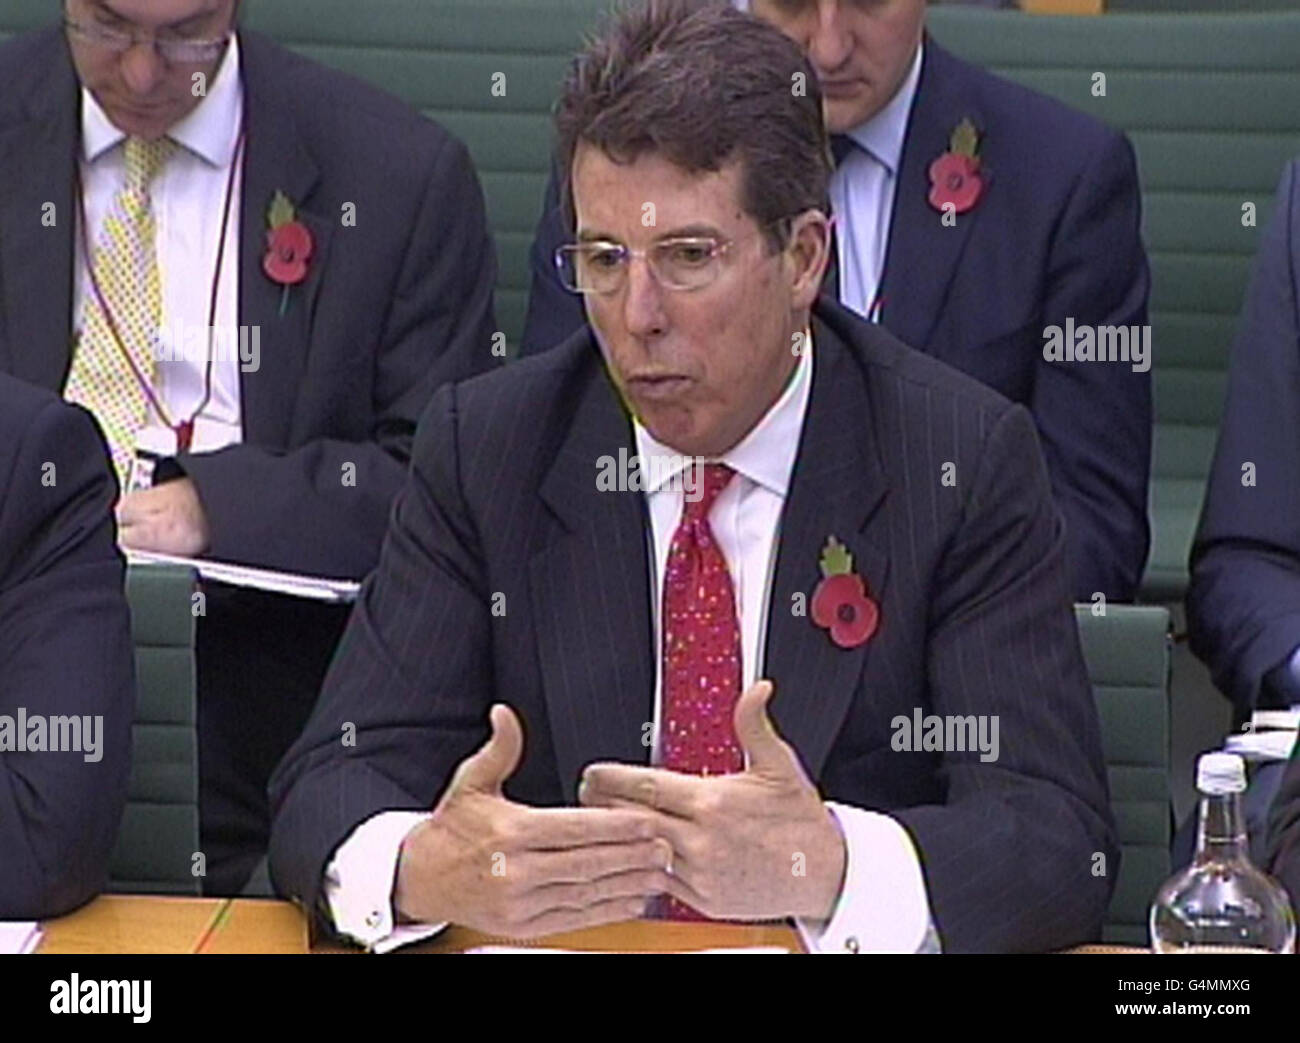 Bob Diamond, Group Chief Executive of Barclays gives evidence to a Joint Financial Services Committee at Portcullis House, London. Stock Photo